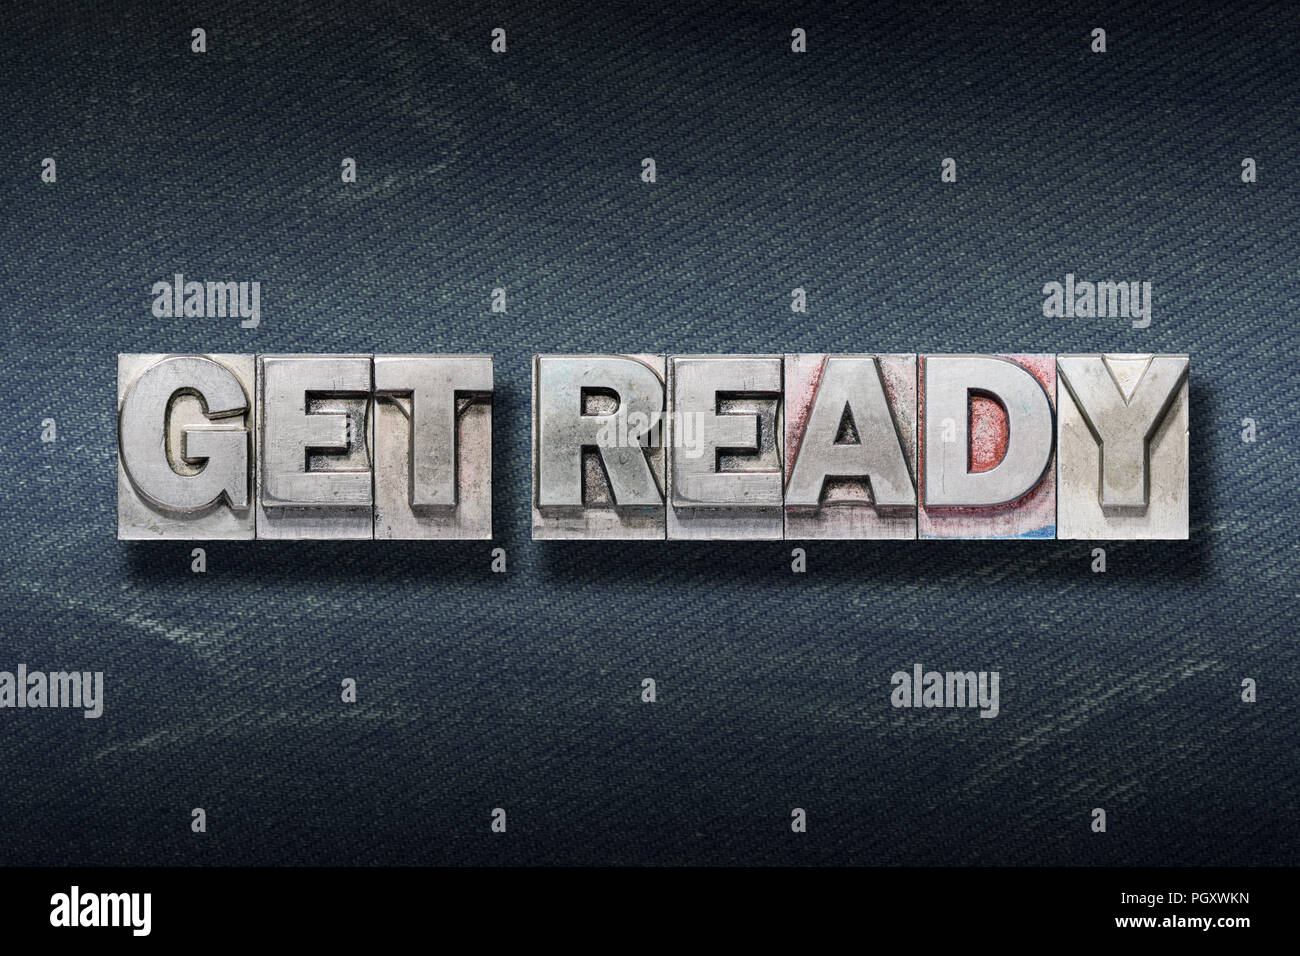 get ready phrase made from metallic letterpress on dark jeans background Stock Photo